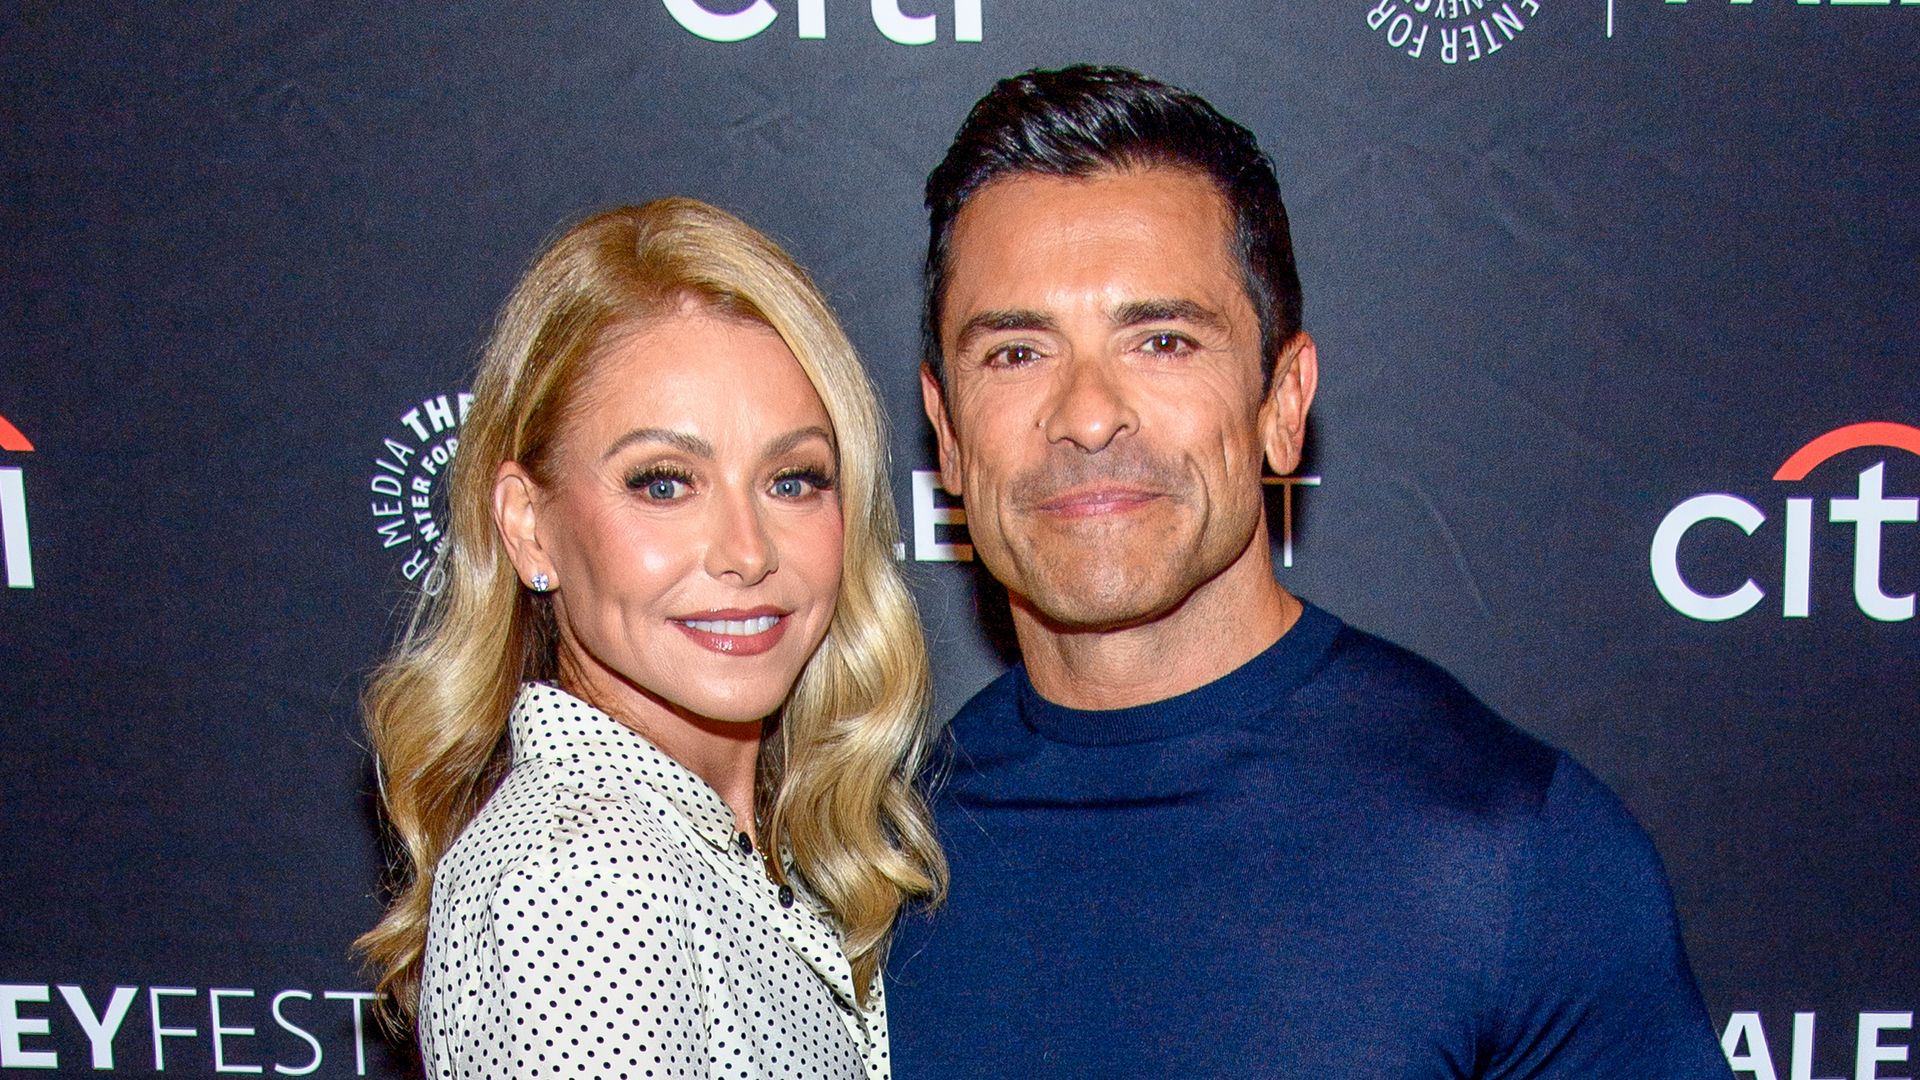 Kelly Ripa and Mark Consuelos attend "Live with Kelly and Mark" at PaleyFest NY 2023 at The Paley Museum on October 11, 2023 in New York City.